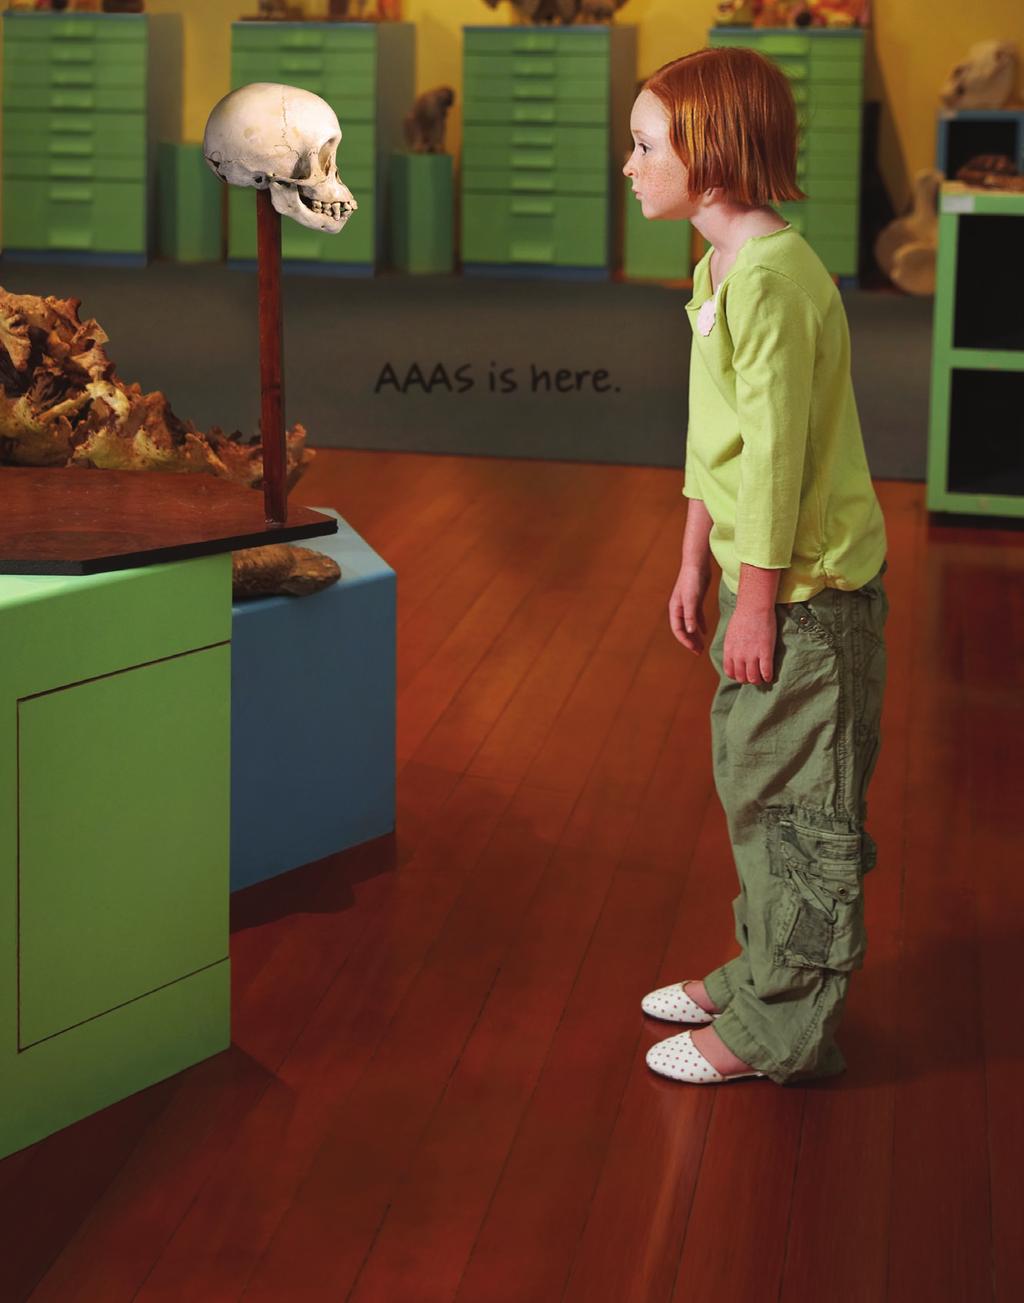 AAAS is here. Evolution In America today, 1 in 3 individuals do not accept evolution. 1 That s why AAAS continues to play an important role in the effort to protect the integrity of science education.